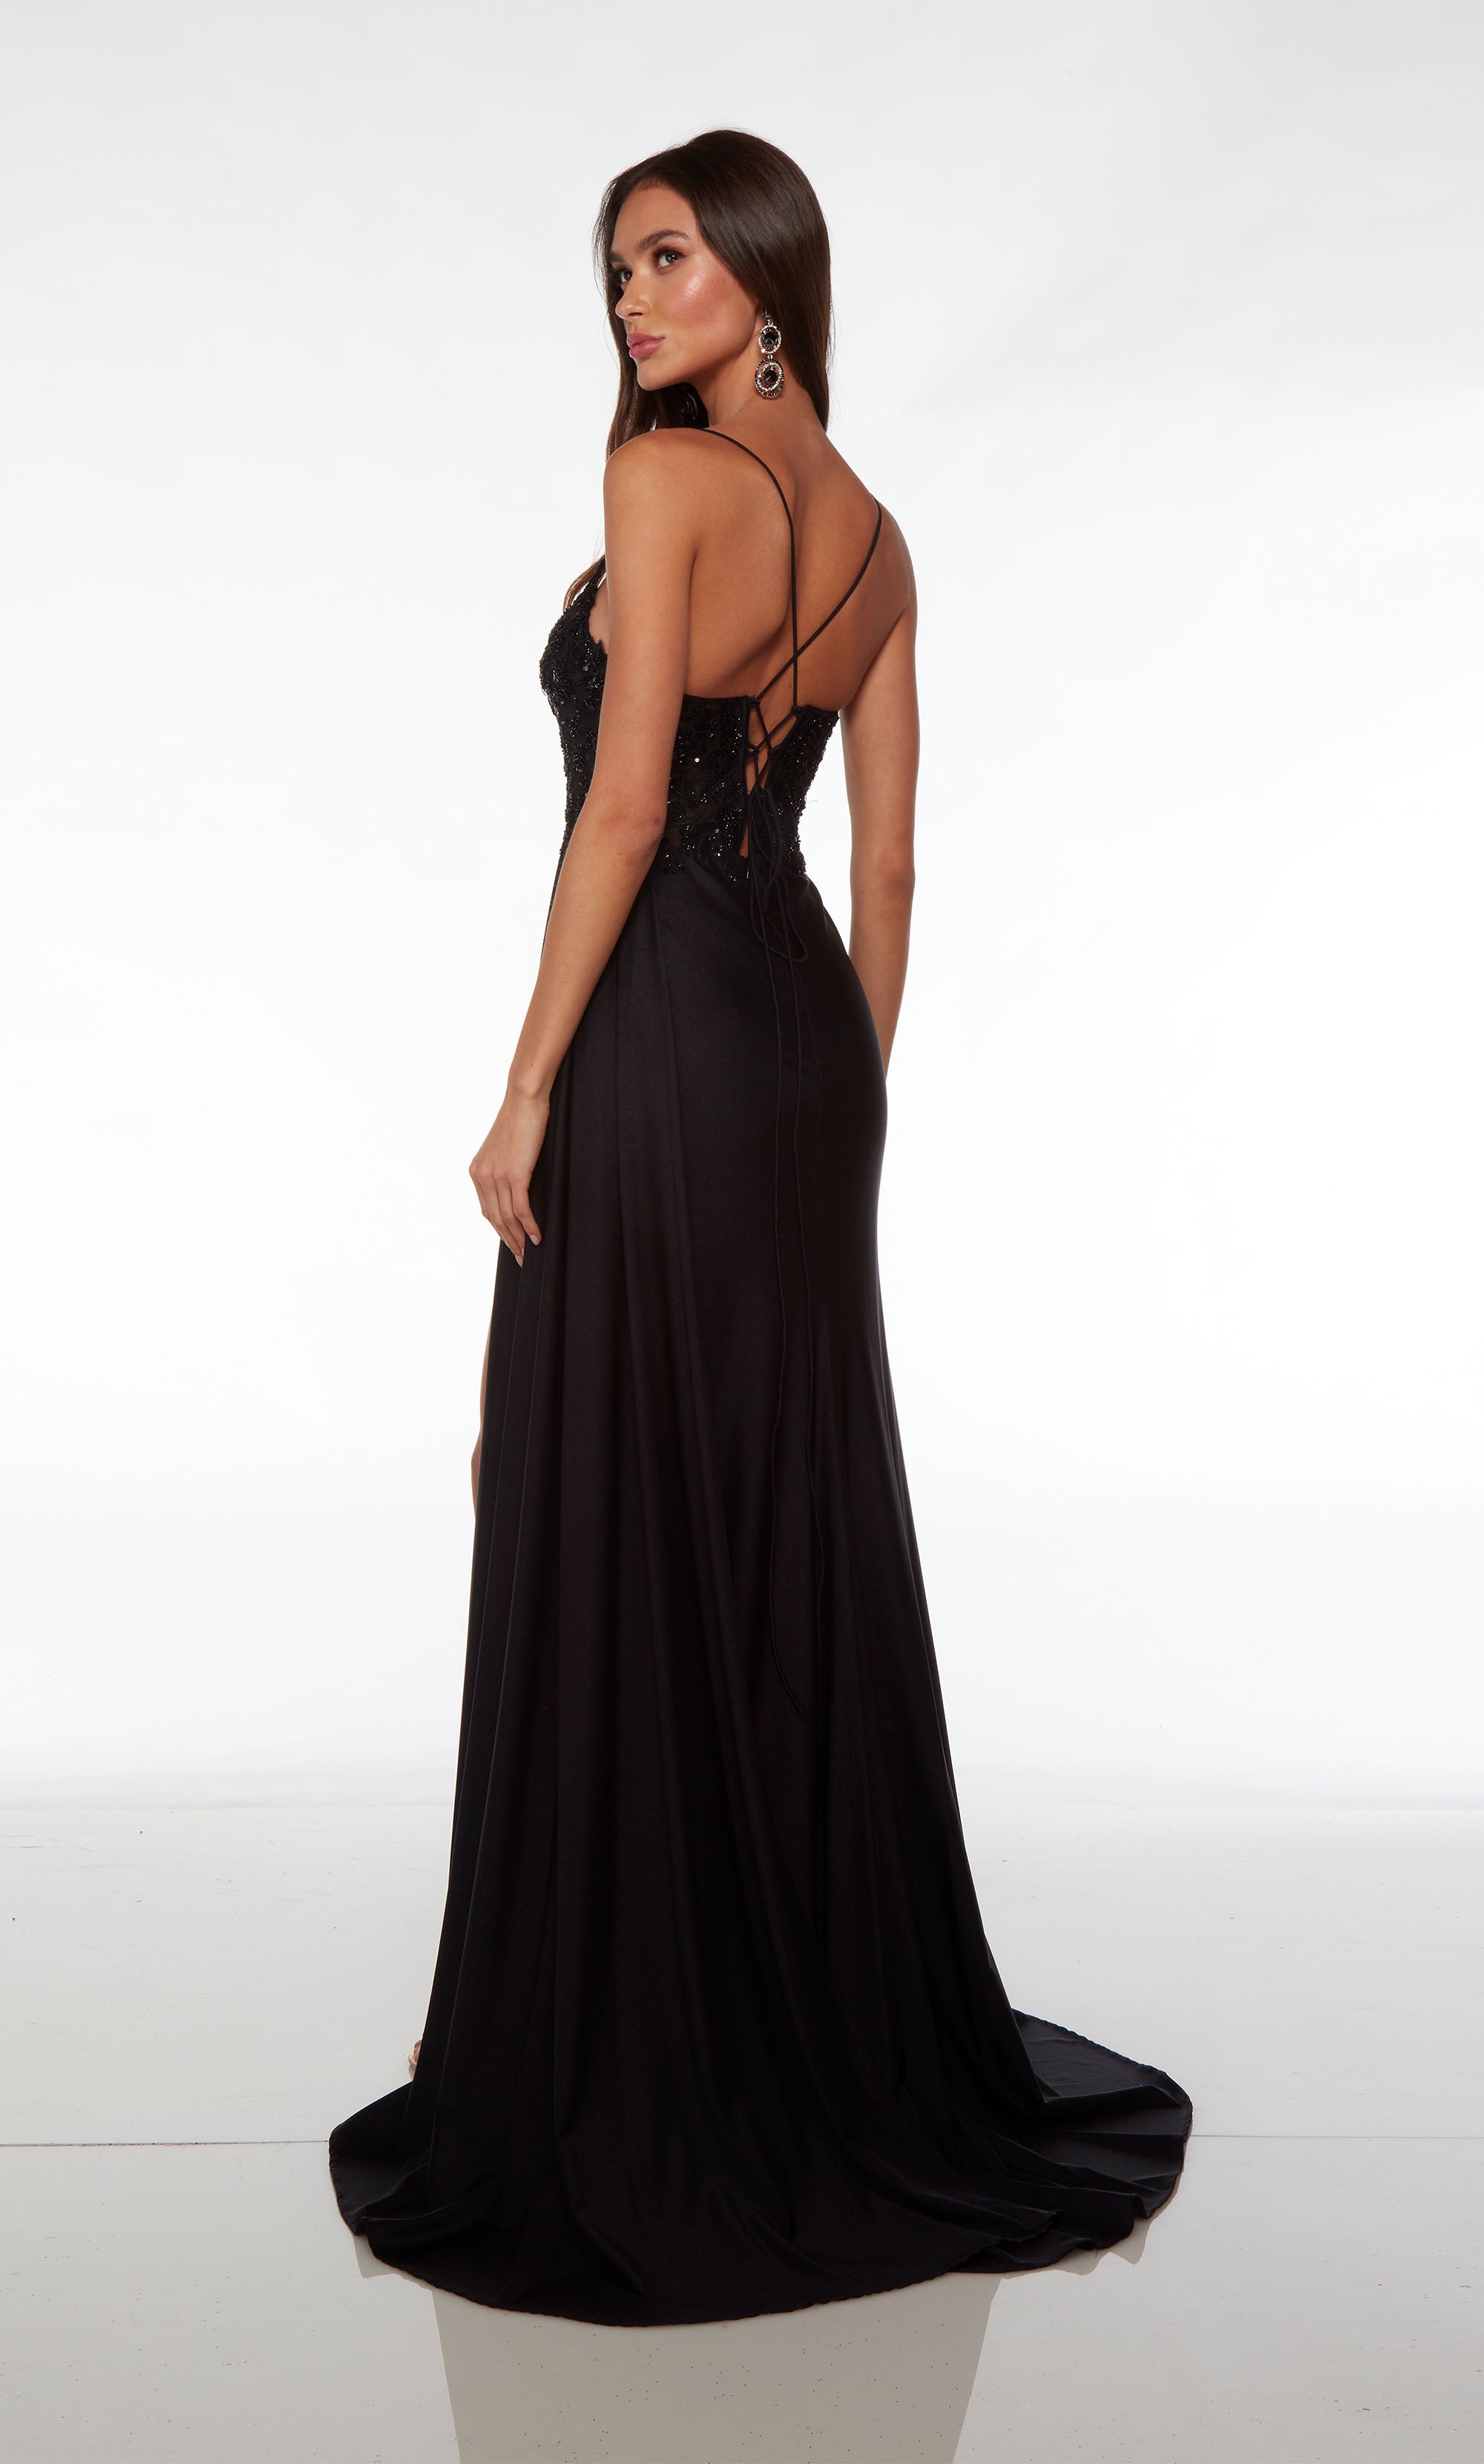 Chic black formal gown: scooped plunging neckline, spaghetti straps, sheer lace bodice, rhinestone-trimmed high slit, crisscross lace-up back, and train.